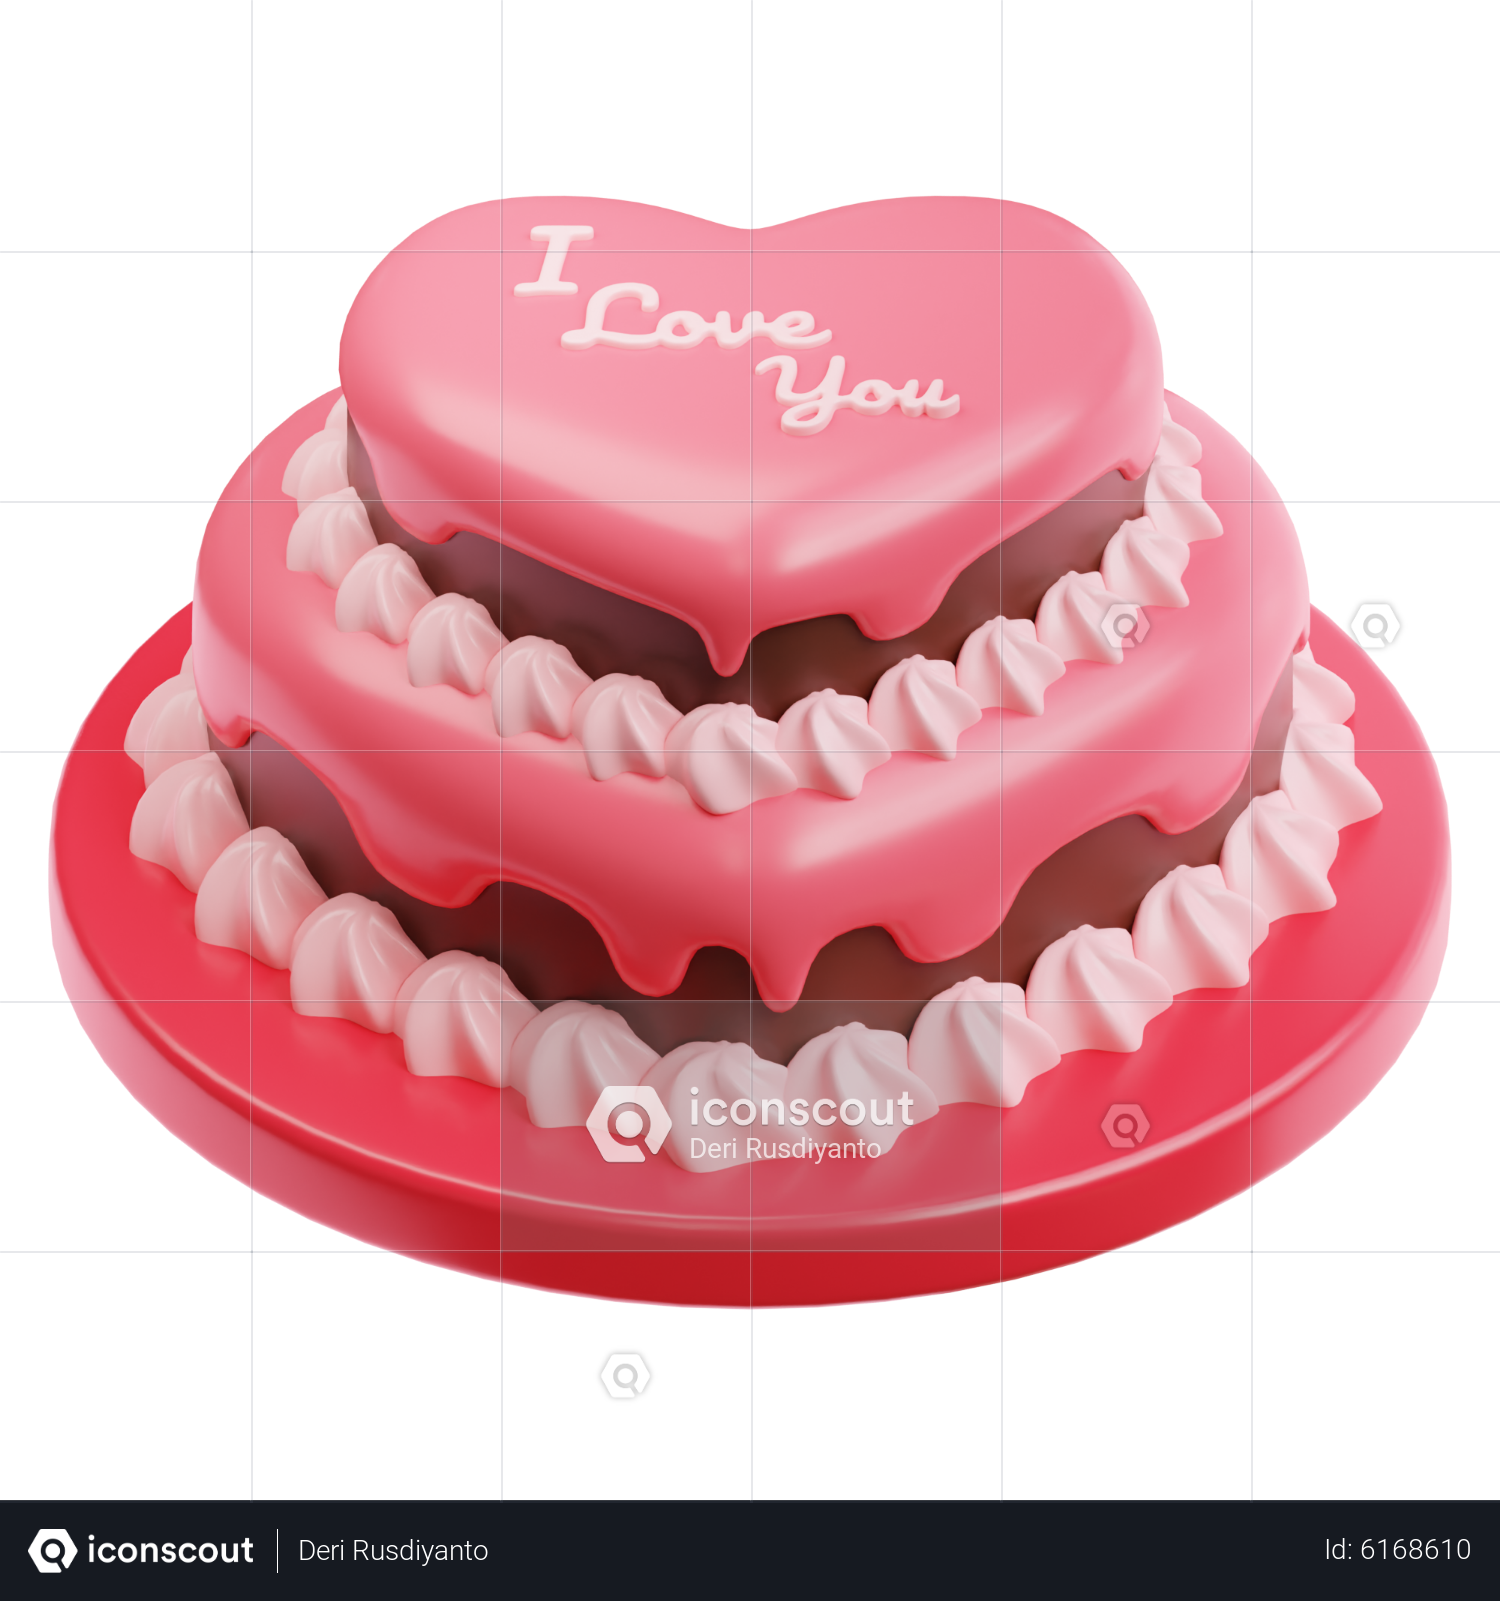 VALENTINES SPECIAL CAKE 002 1 kg - Asansol Cake Delivery Shop